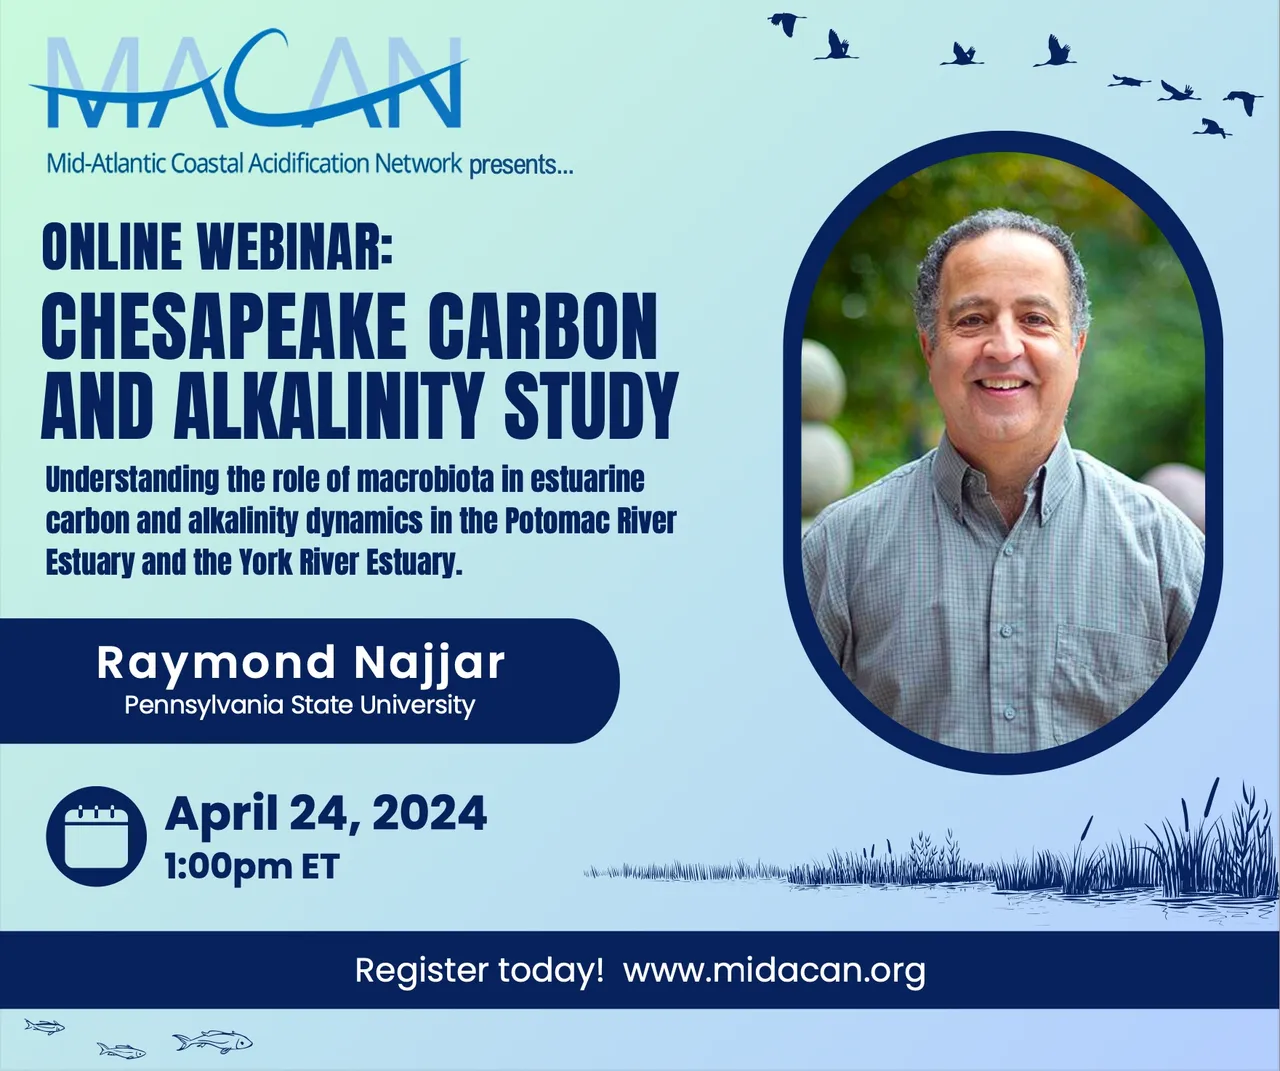 Flyer reading: Online Webinar<br />
Chesapeake Carbon and Alkalinity Study<br />
Understanding the role of macrobiota in estuarine carbon and alkalinity dynamics in the Potomac River Estuary and the York River Estuary<br />
Raymond Najjar<br />
Pennsylvania State University<br />
April 24, 2024